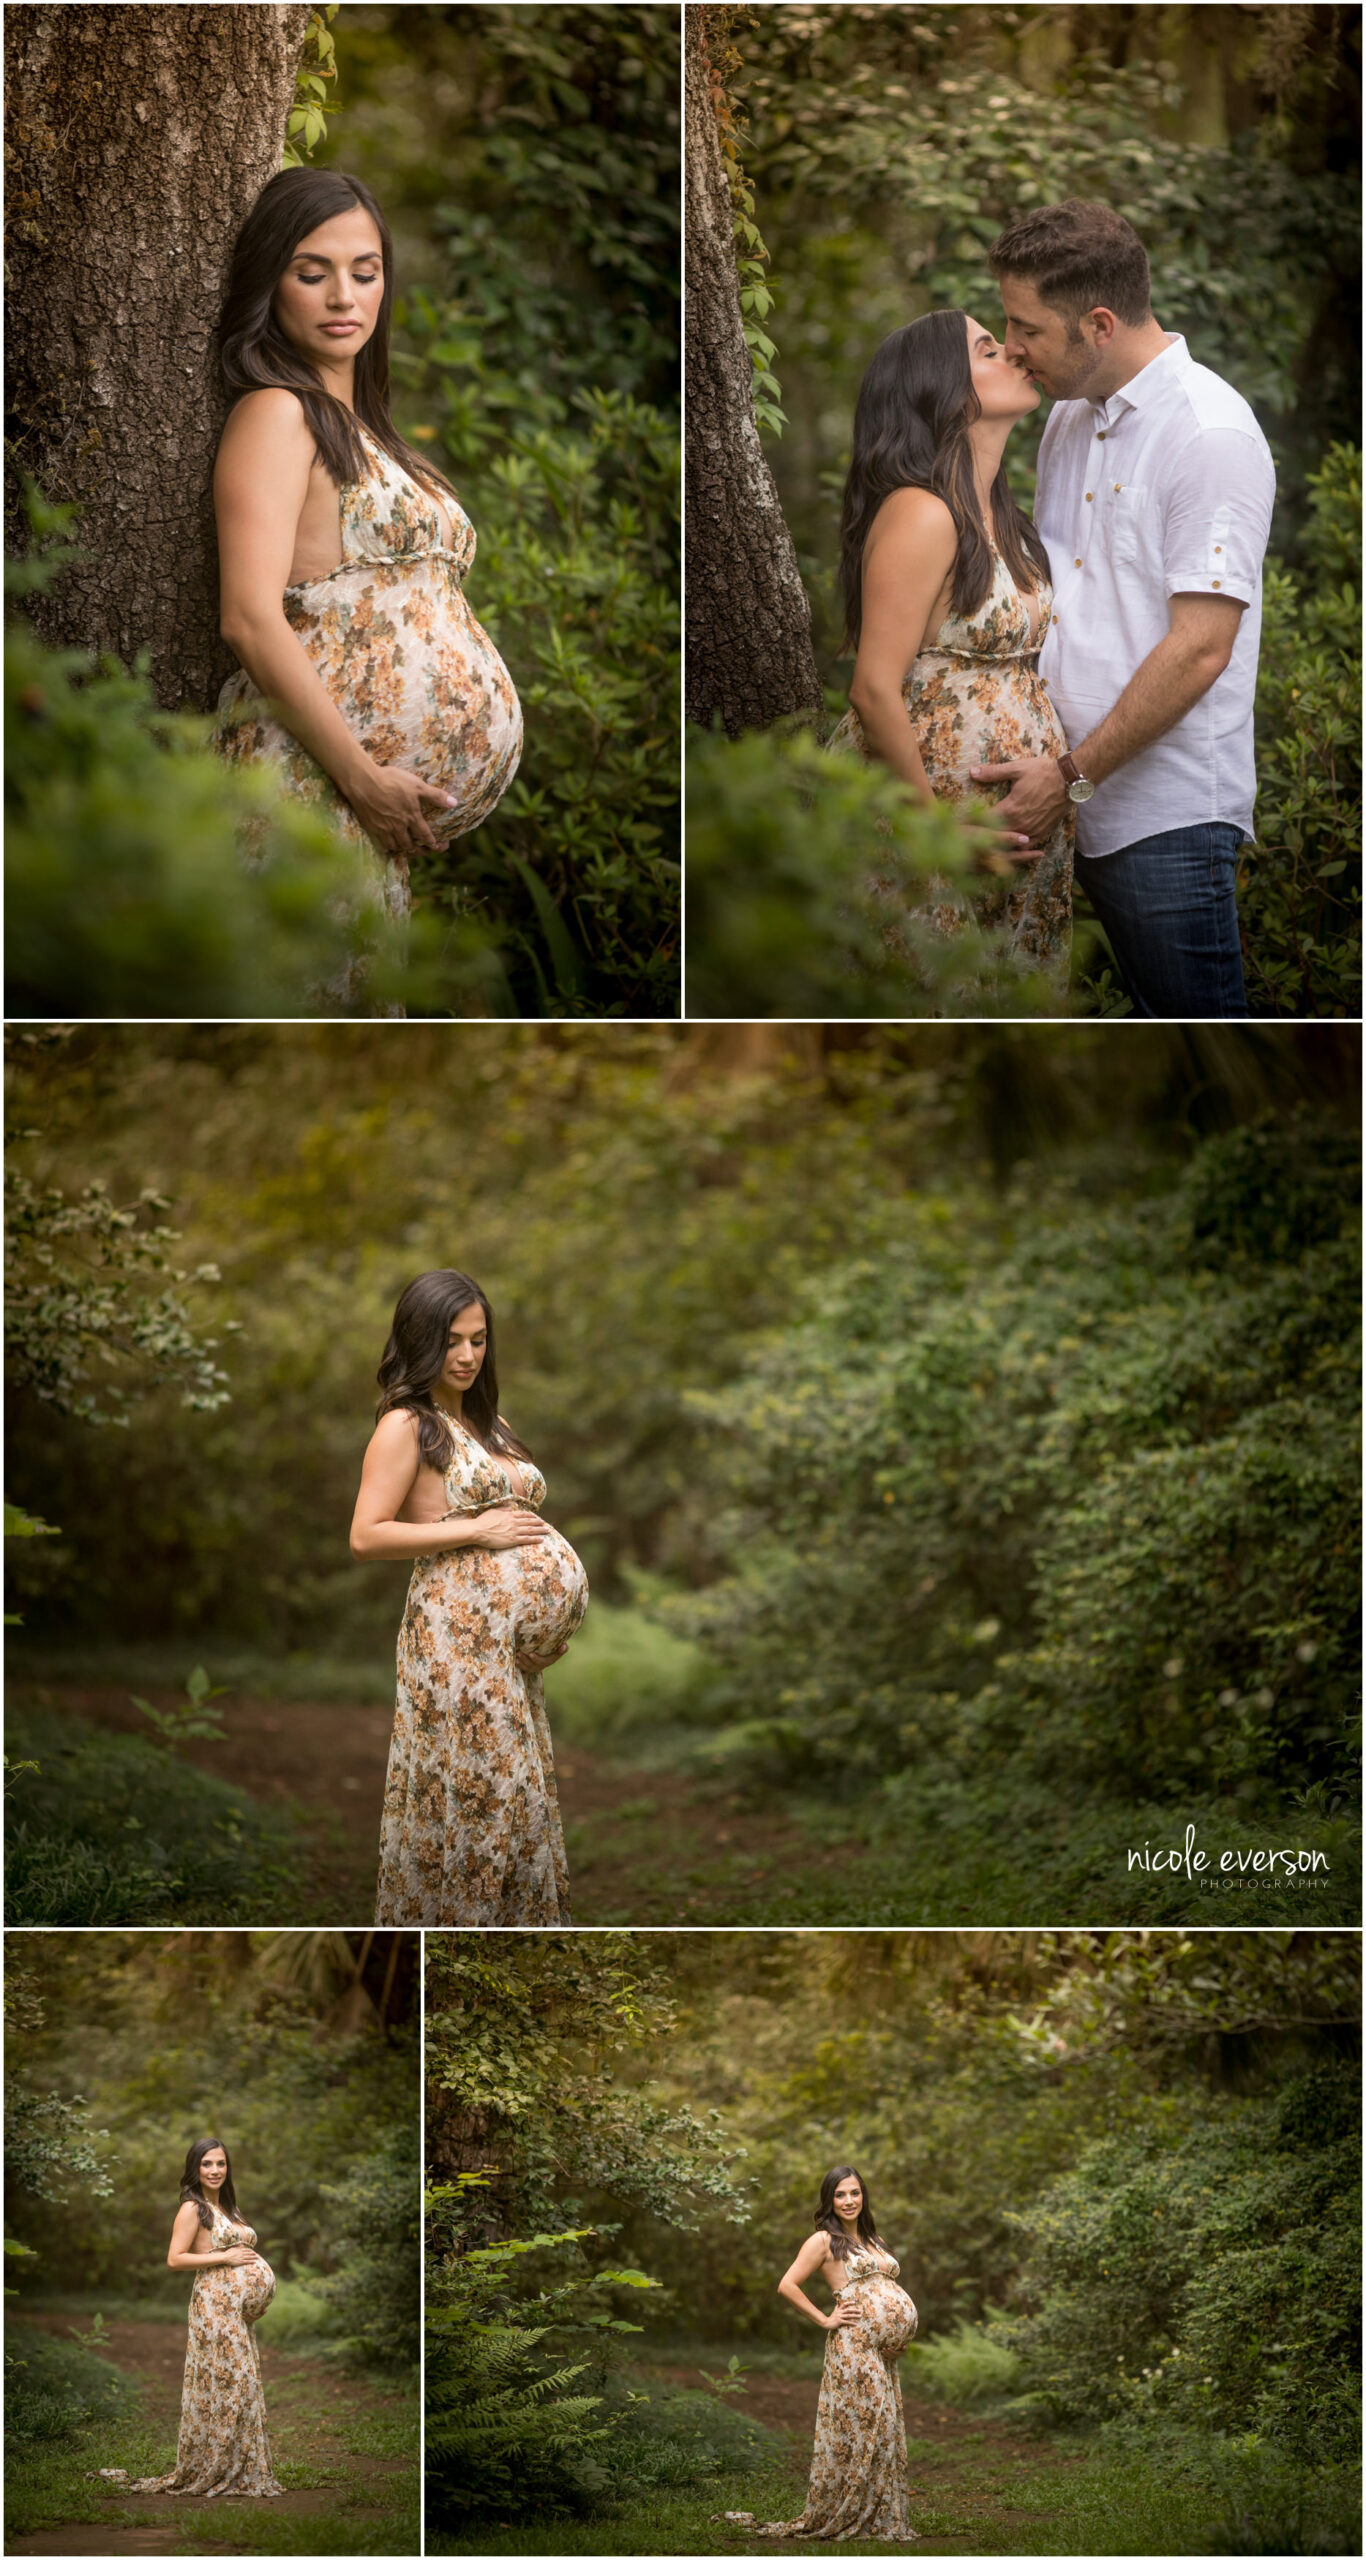 Maternity Photography that Celebrates All Types of Motherhood